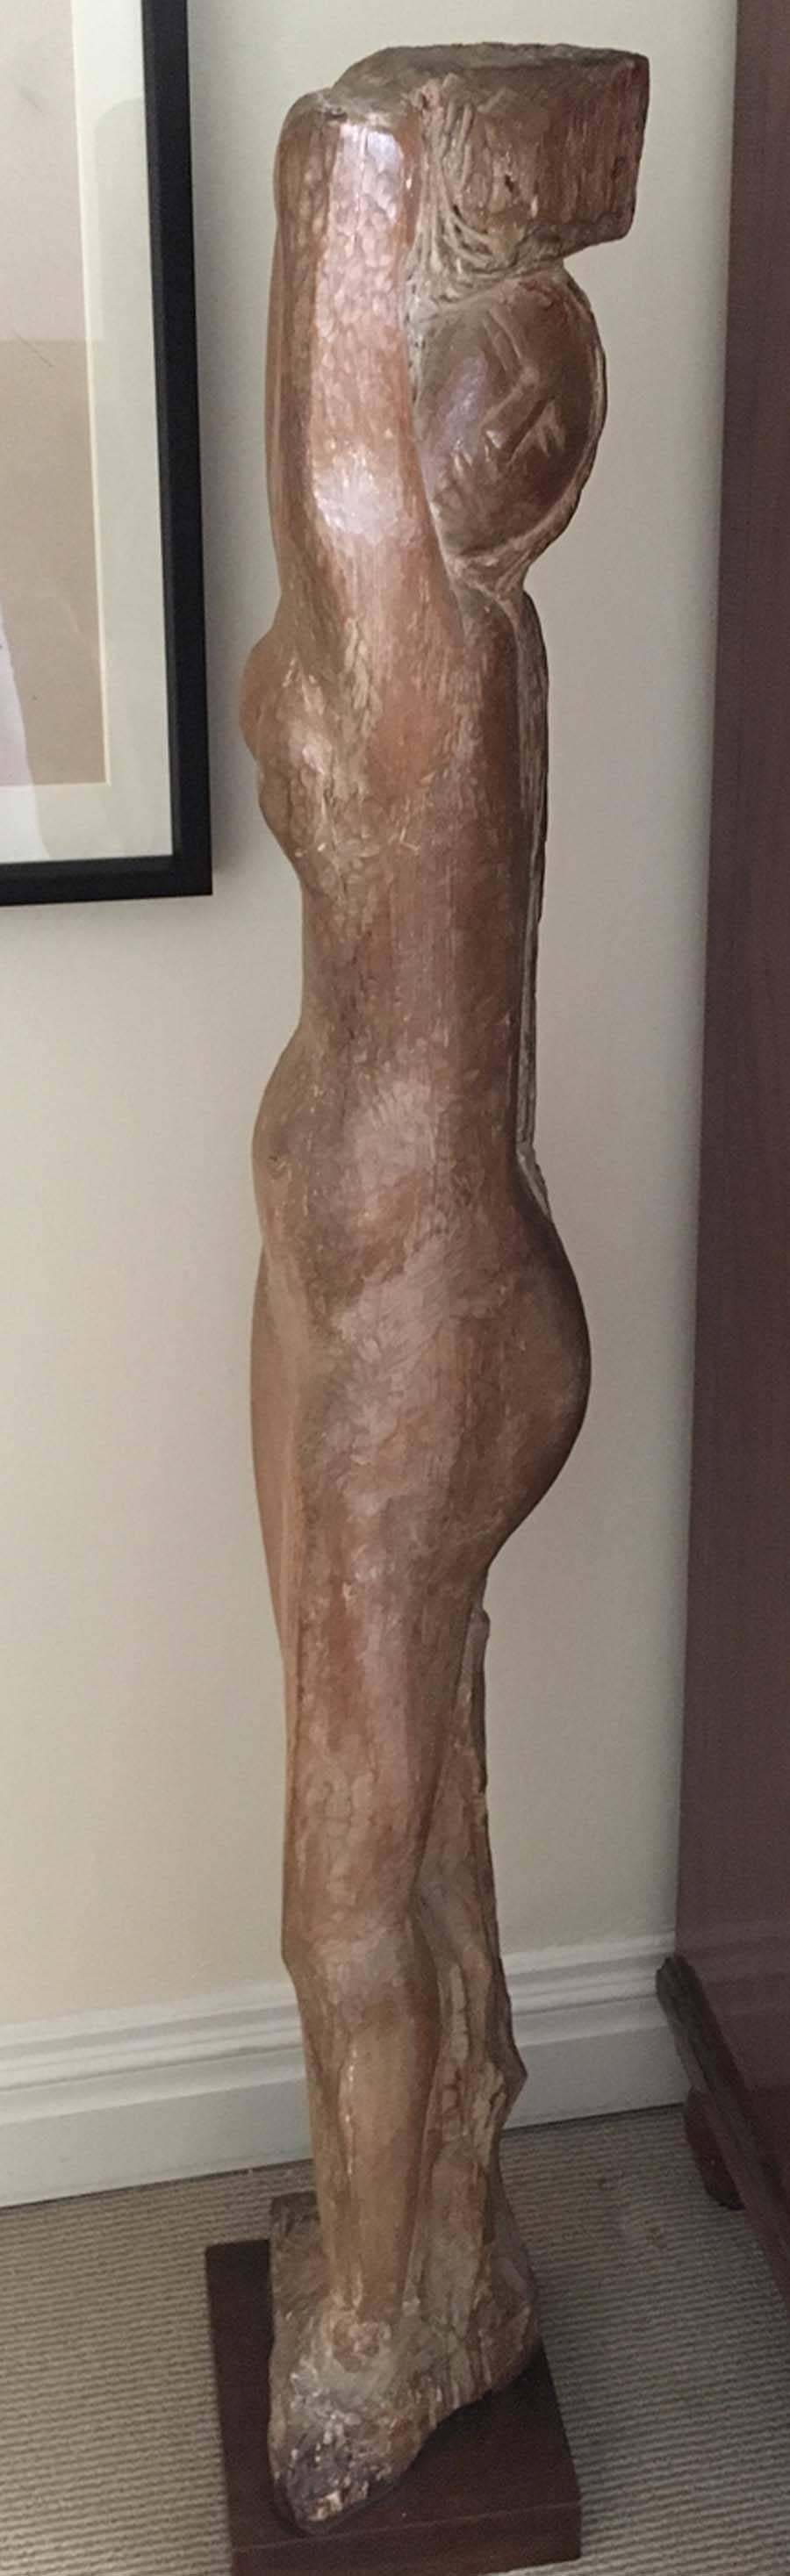 Standing Nude - Sculpture by Lorrie Goulet